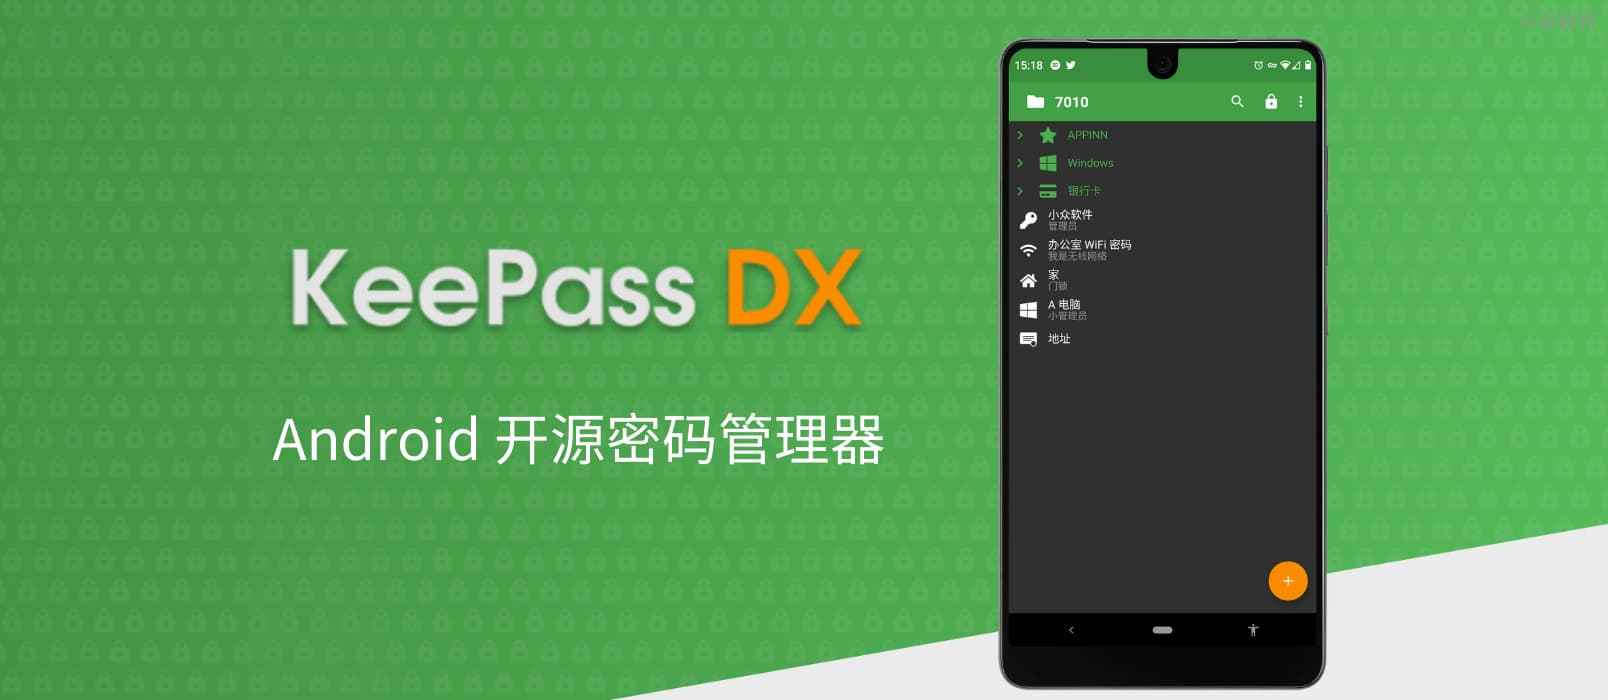 KeePass DX – 开源密码管理器[Android]